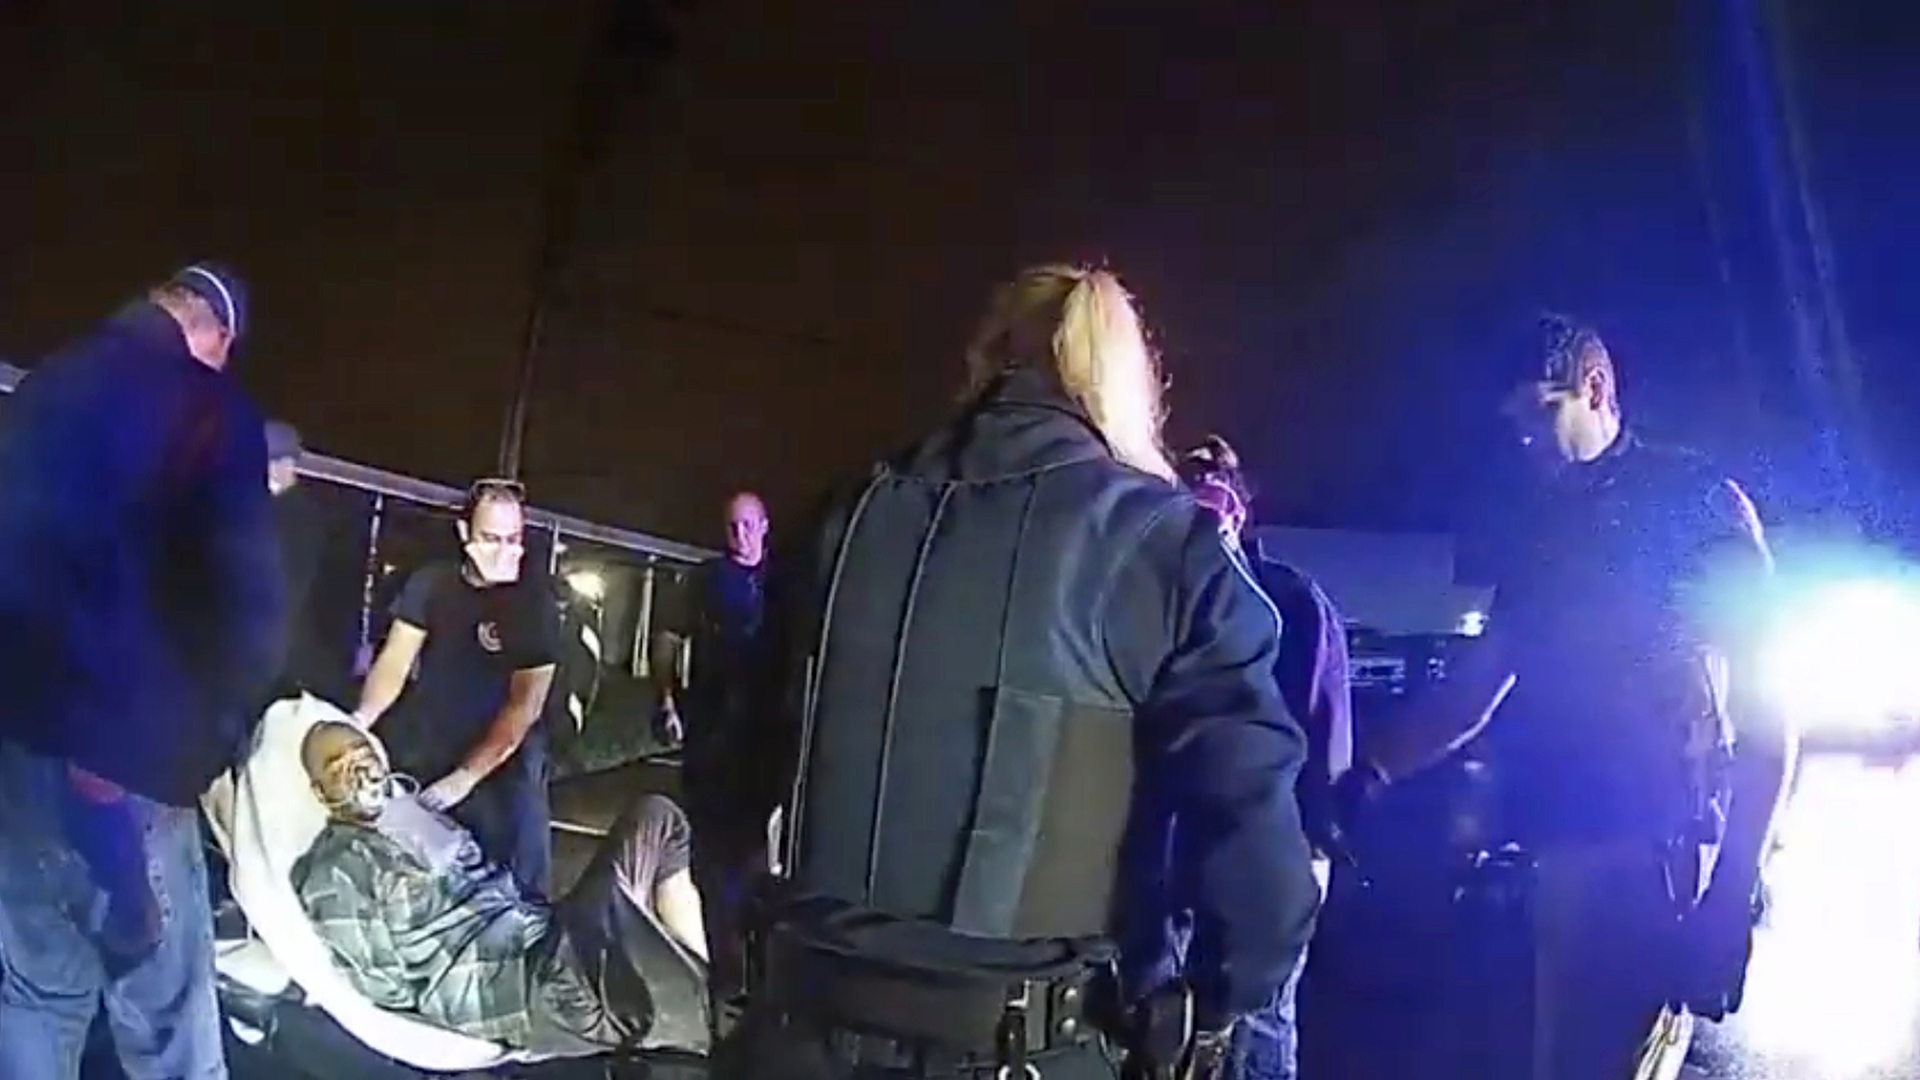 Demetrio Jackson lays unconscious on a gurney while wearing a bag valve mask, with multiple police officers standing around him under a night sky.